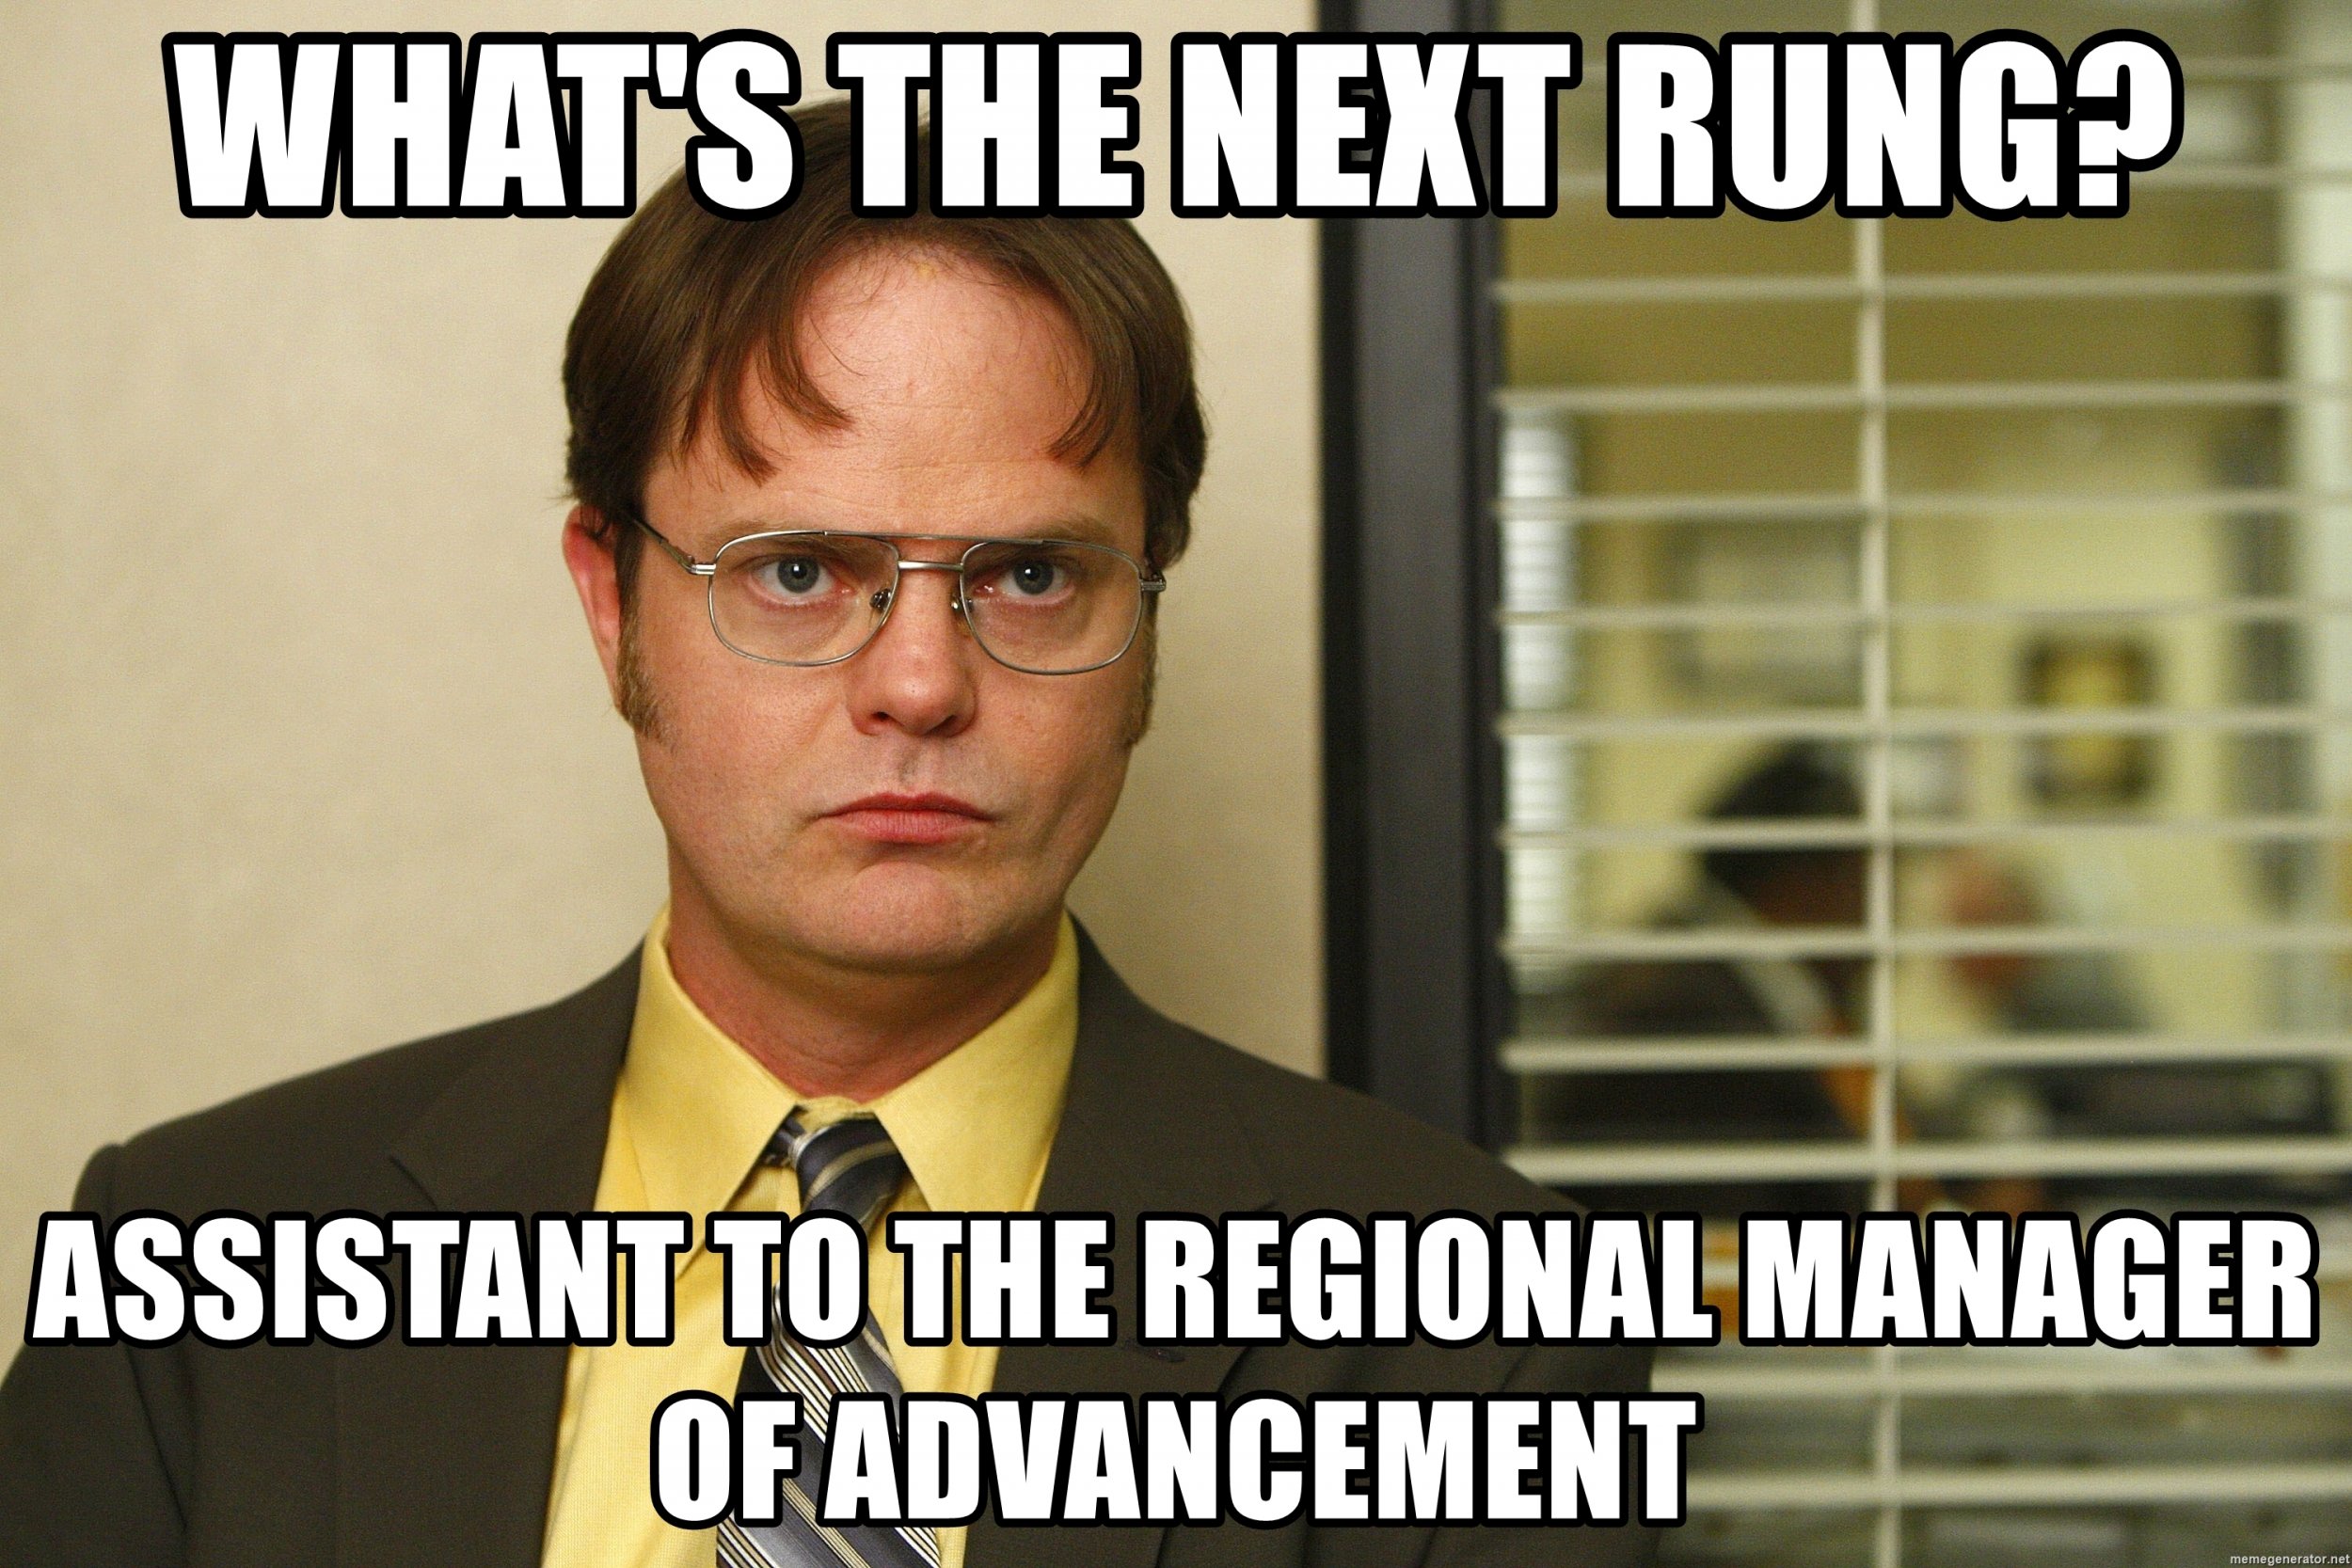 whats-the-next-rung-assistant-to-the-regional-manager-of-advancement.jpg